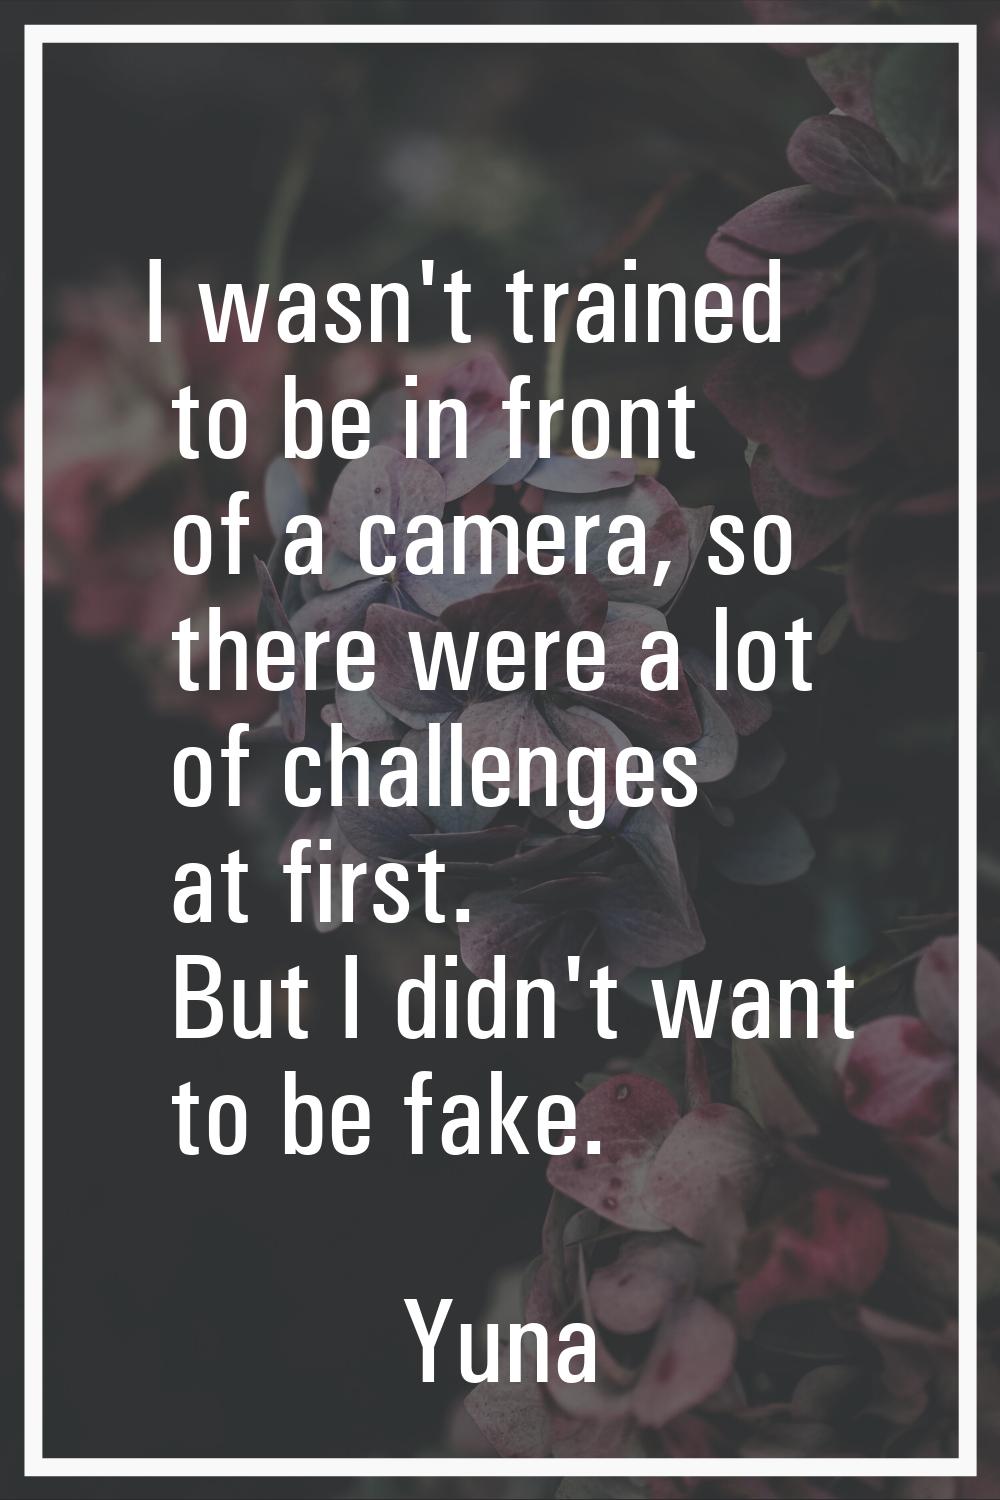 I wasn't trained to be in front of a camera, so there were a lot of challenges at first. But I didn